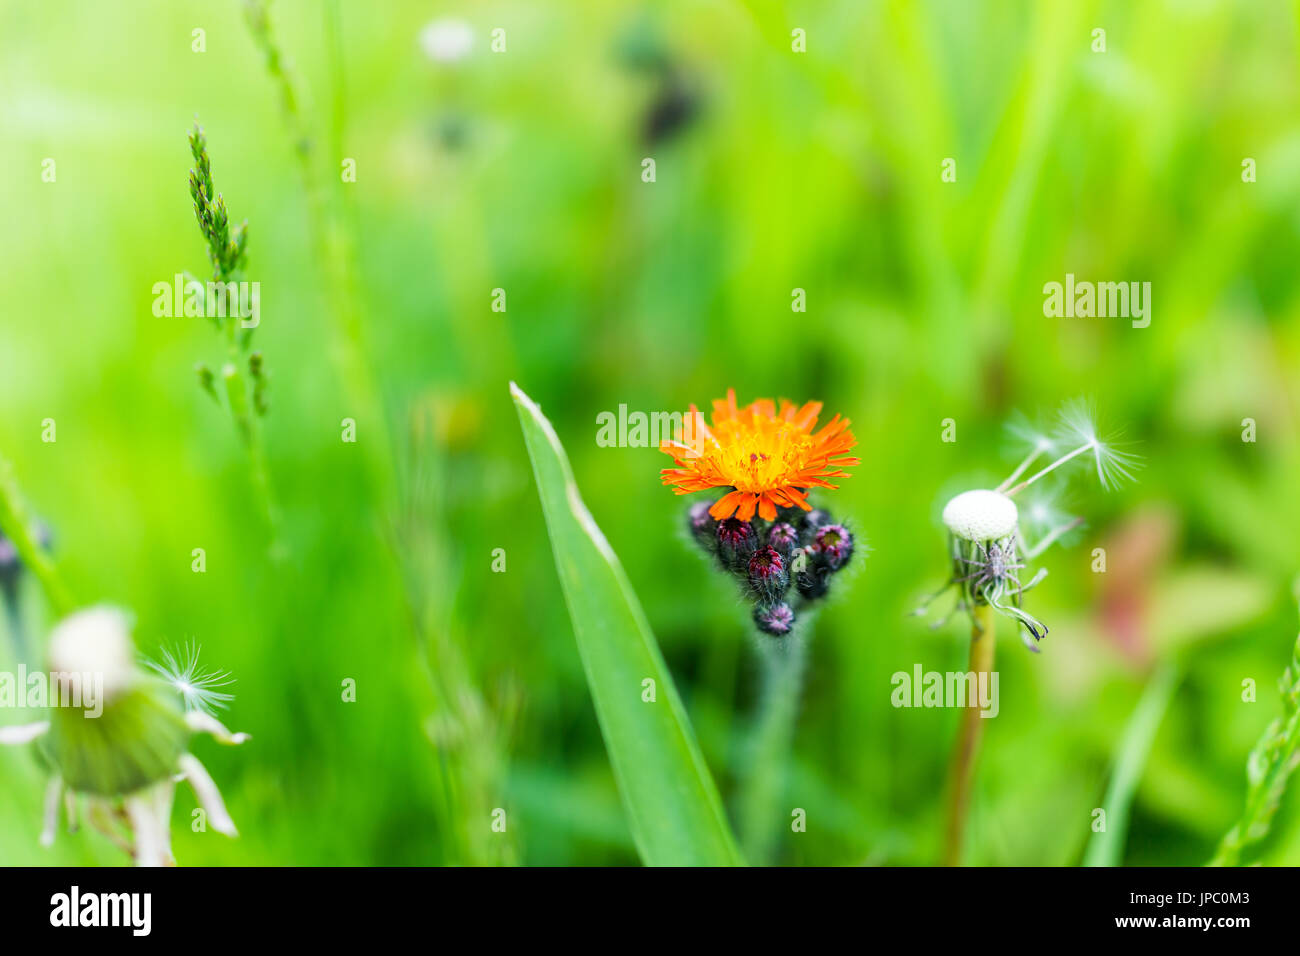 Macro closeup of orange hawkweed flower with green grass bokeh showing detail and texture Stock Photo